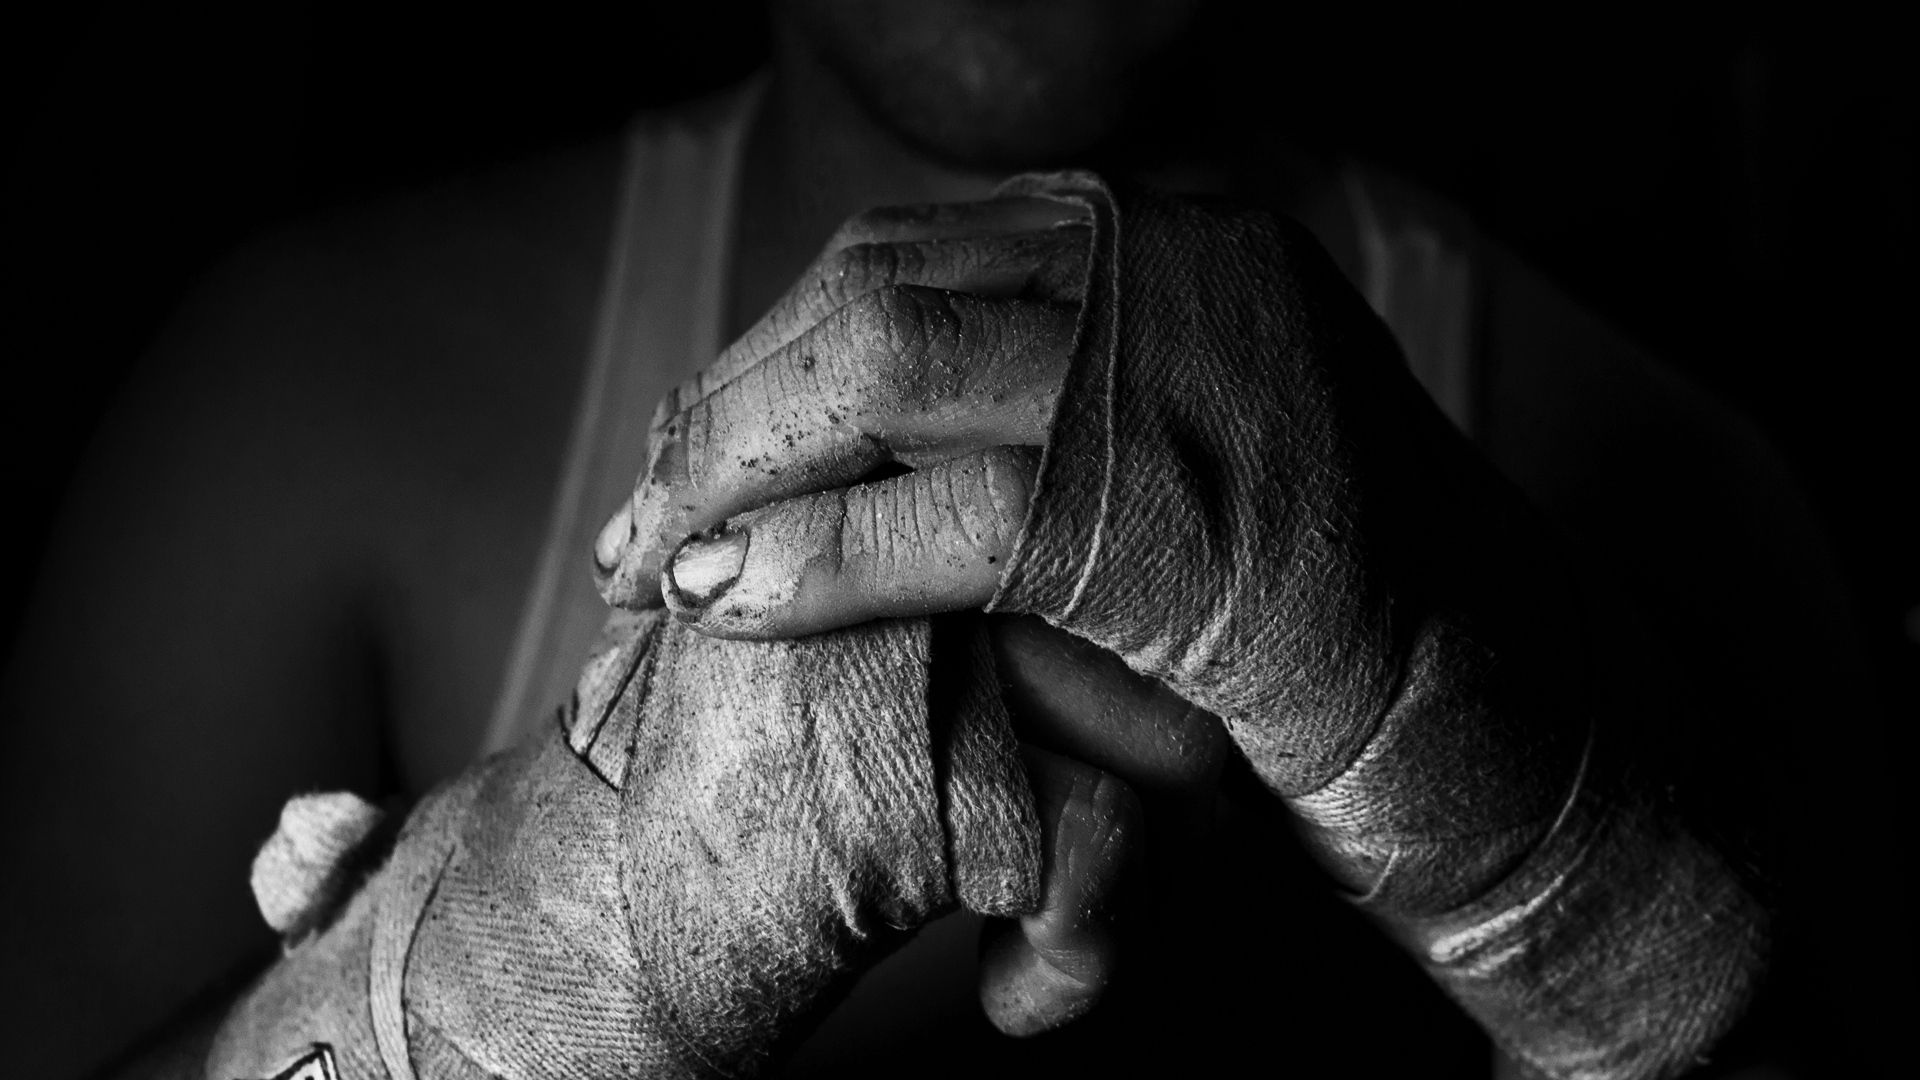 chb, sports, hands, bw, fighter, bandages